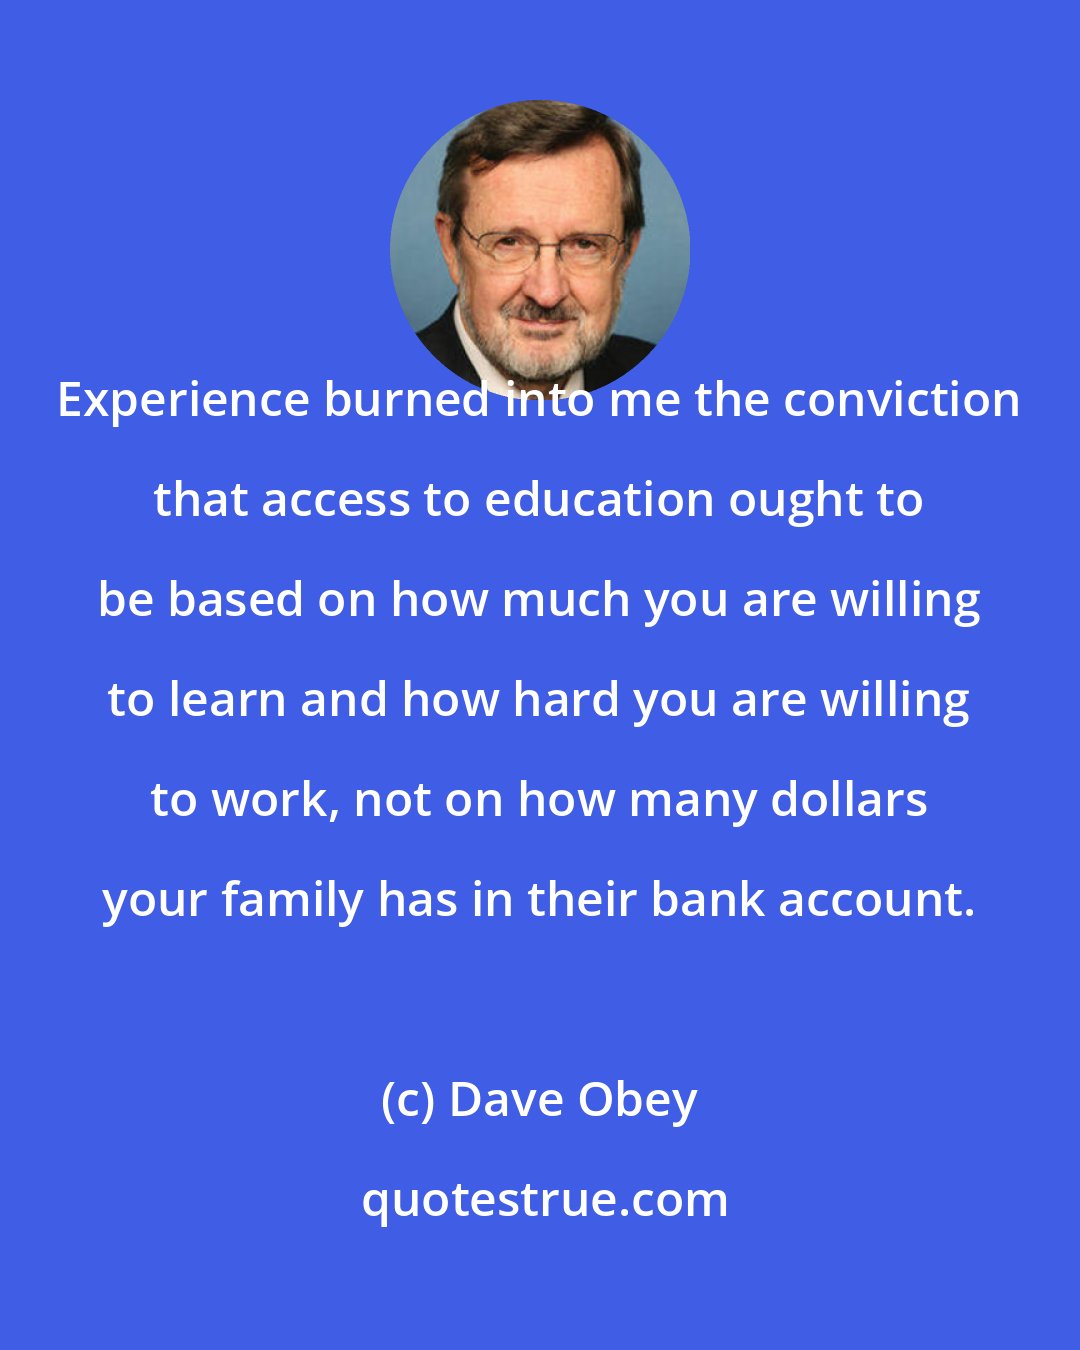 Dave Obey: Experience burned into me the conviction that access to education ought to be based on how much you are willing to learn and how hard you are willing to work, not on how many dollars your family has in their bank account.